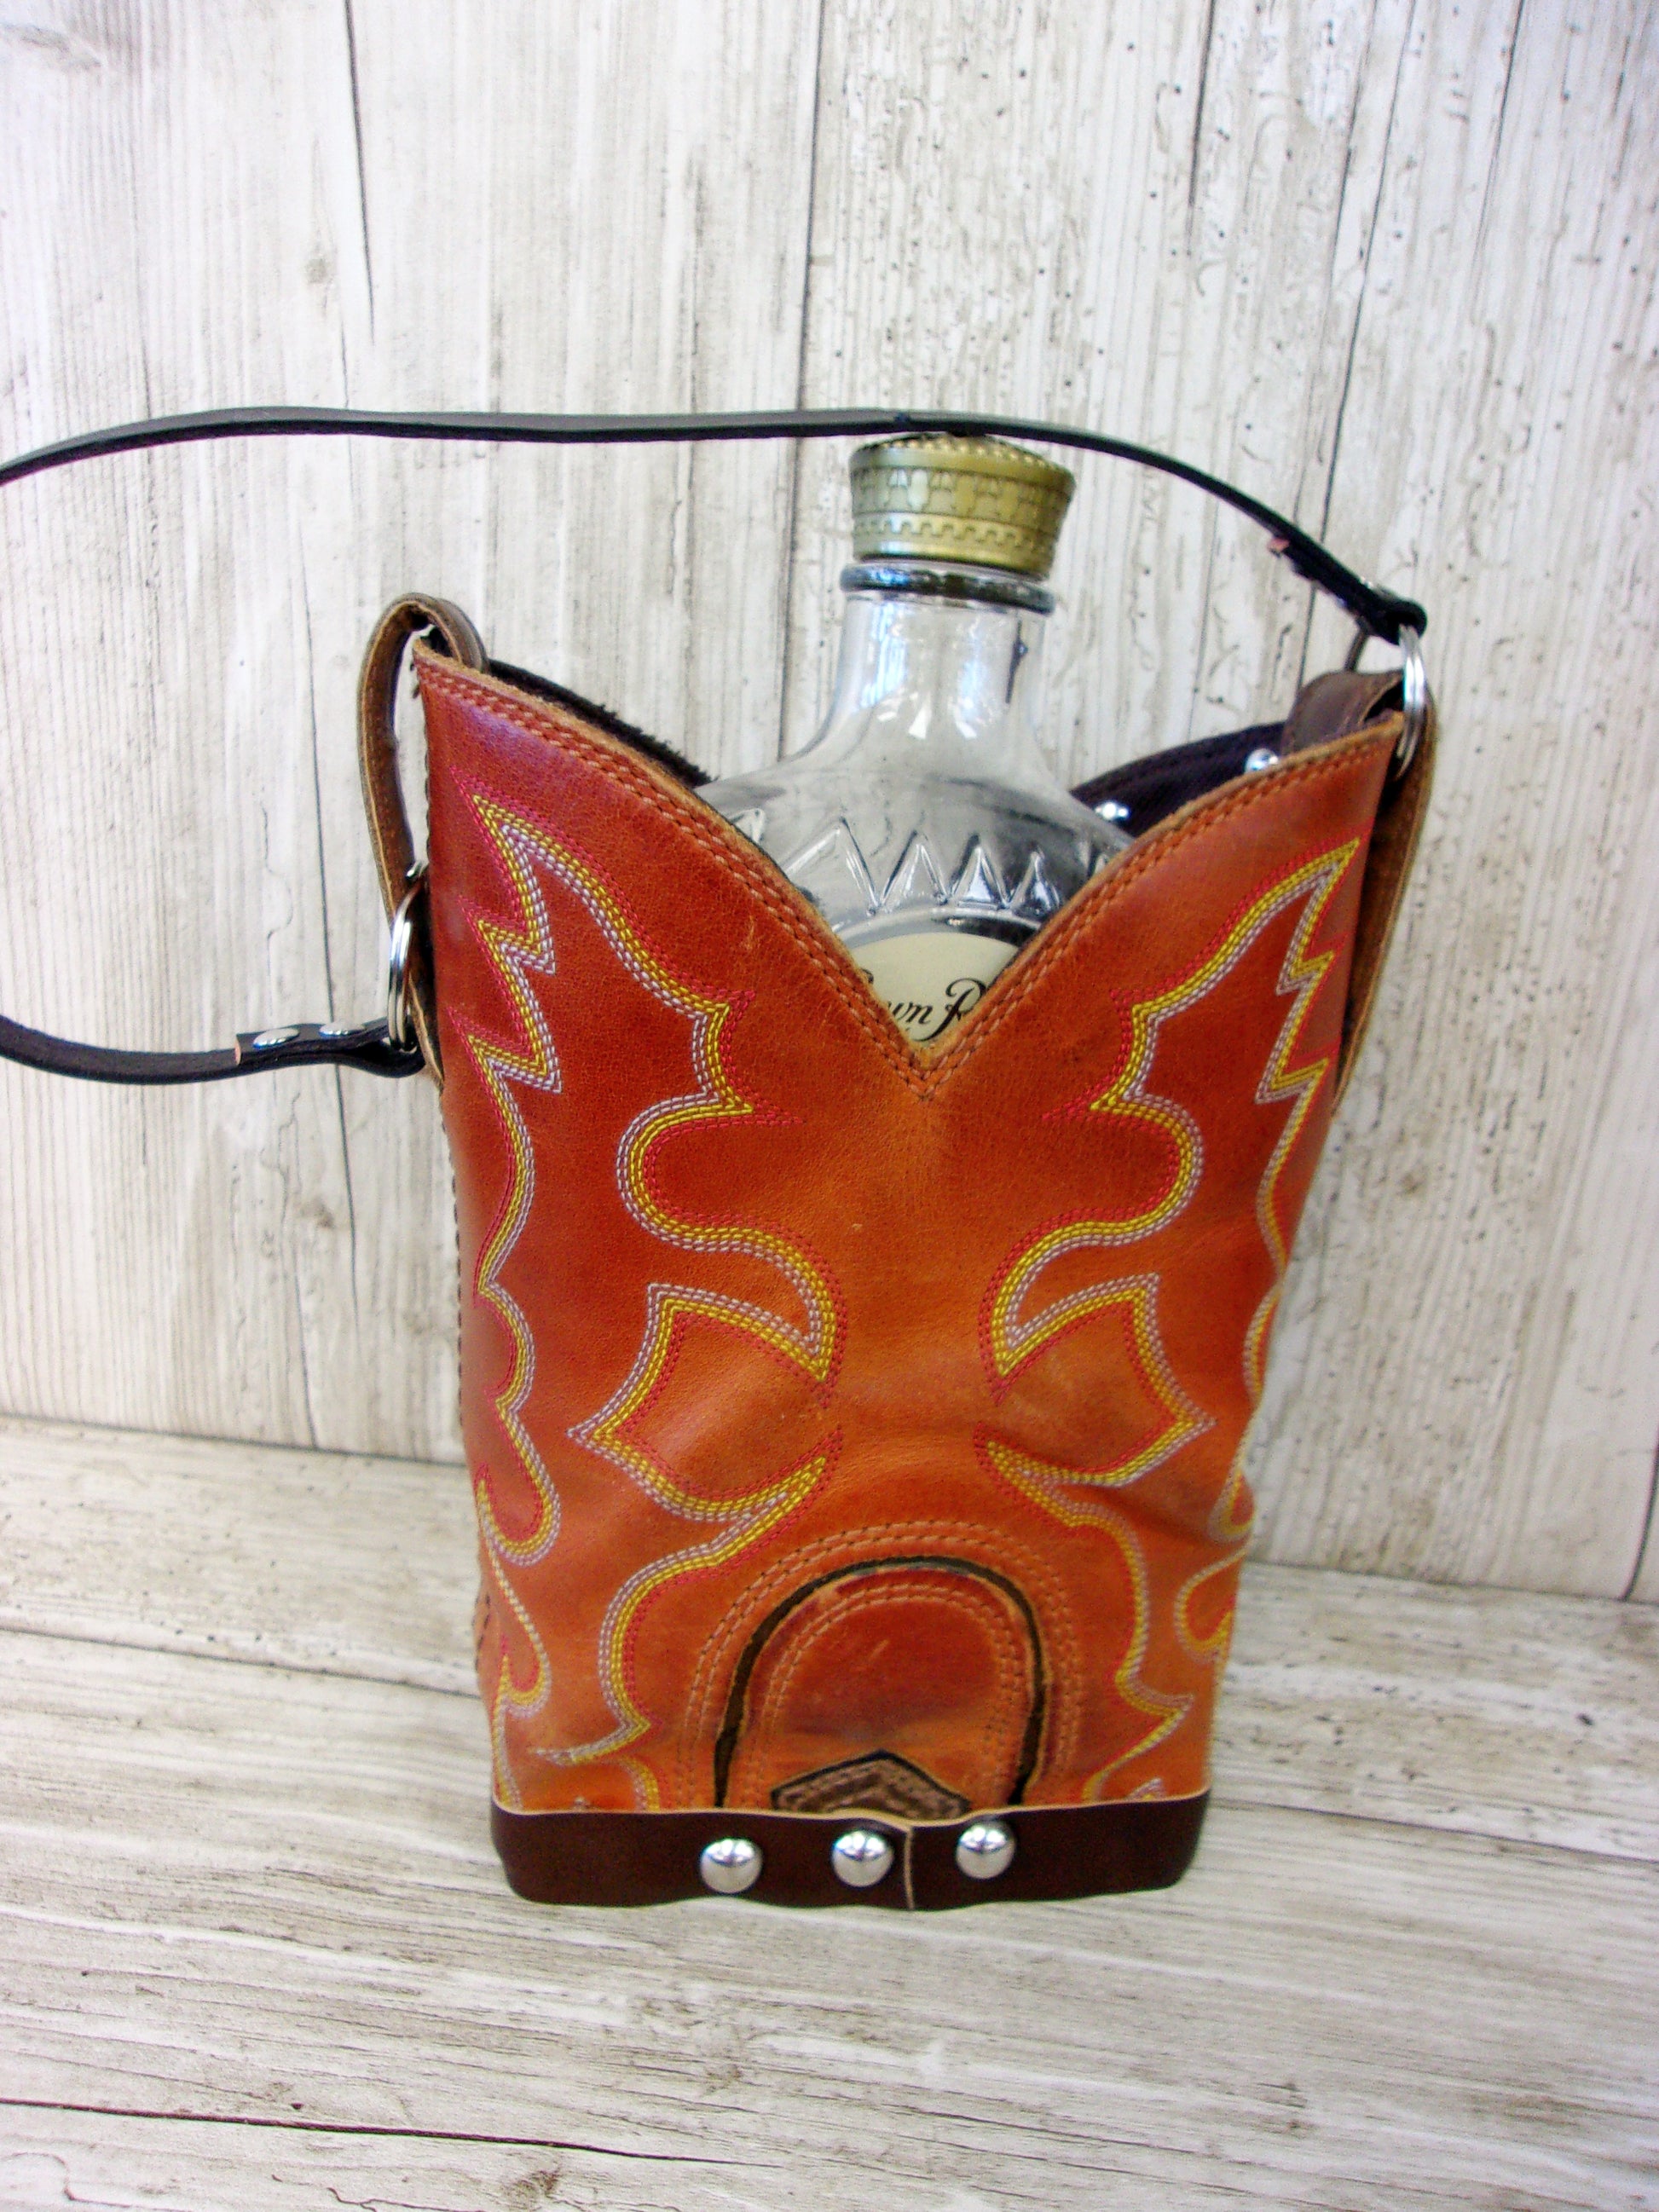 Cowboy Boot Whiskey Tote CR162 handcrafted from cowboy boots. Shop all unique leather western handbags, purses and totes at Chris Thompson Bags